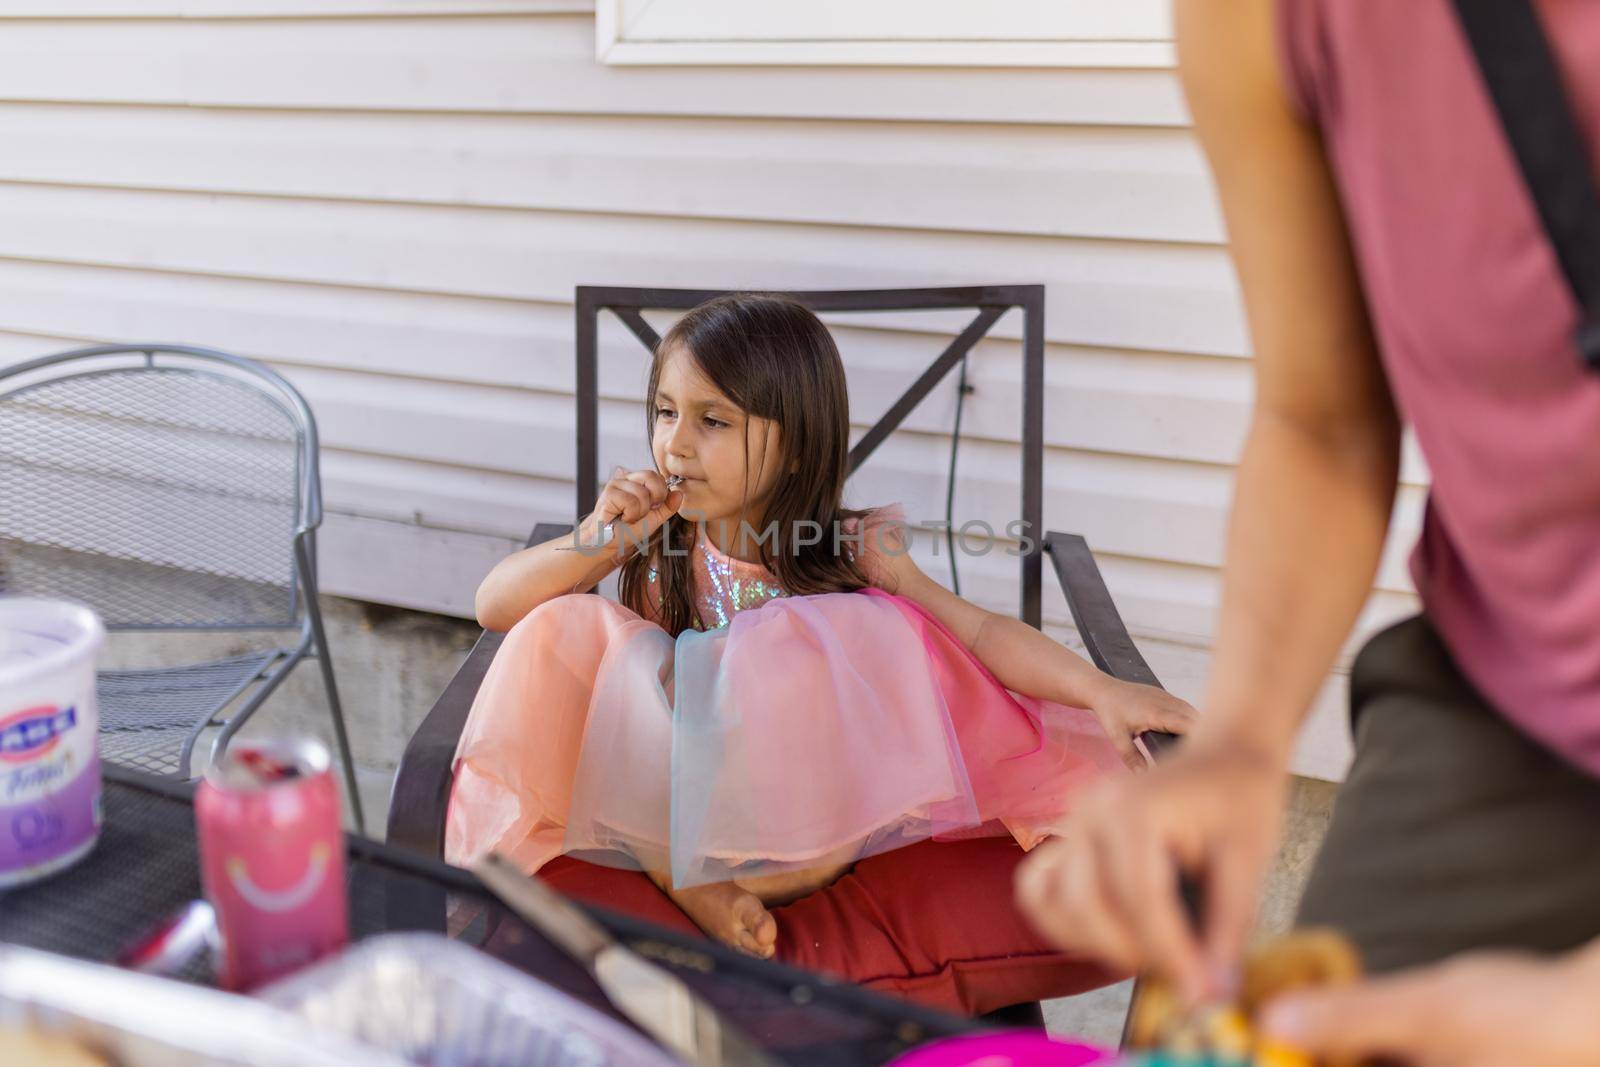 Cute little barefoot girl in pink princess dress sitting at table outside. Adorable young girl on comfortable chair with white wall as background. Kids having fun outdoors